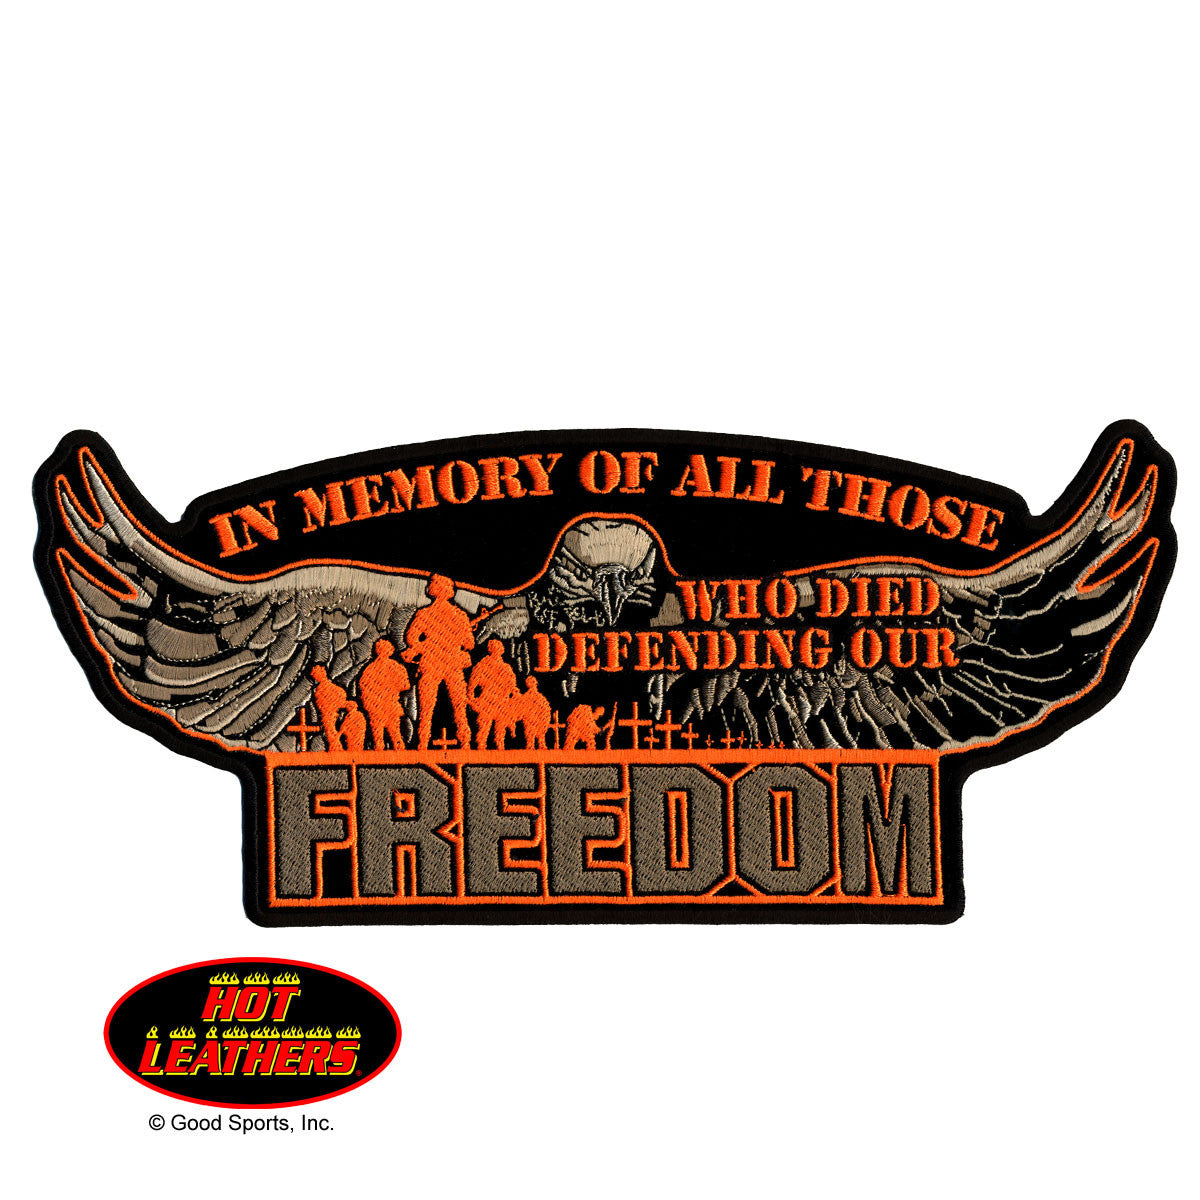 Defending Our Freedom - Maine-Line Leather